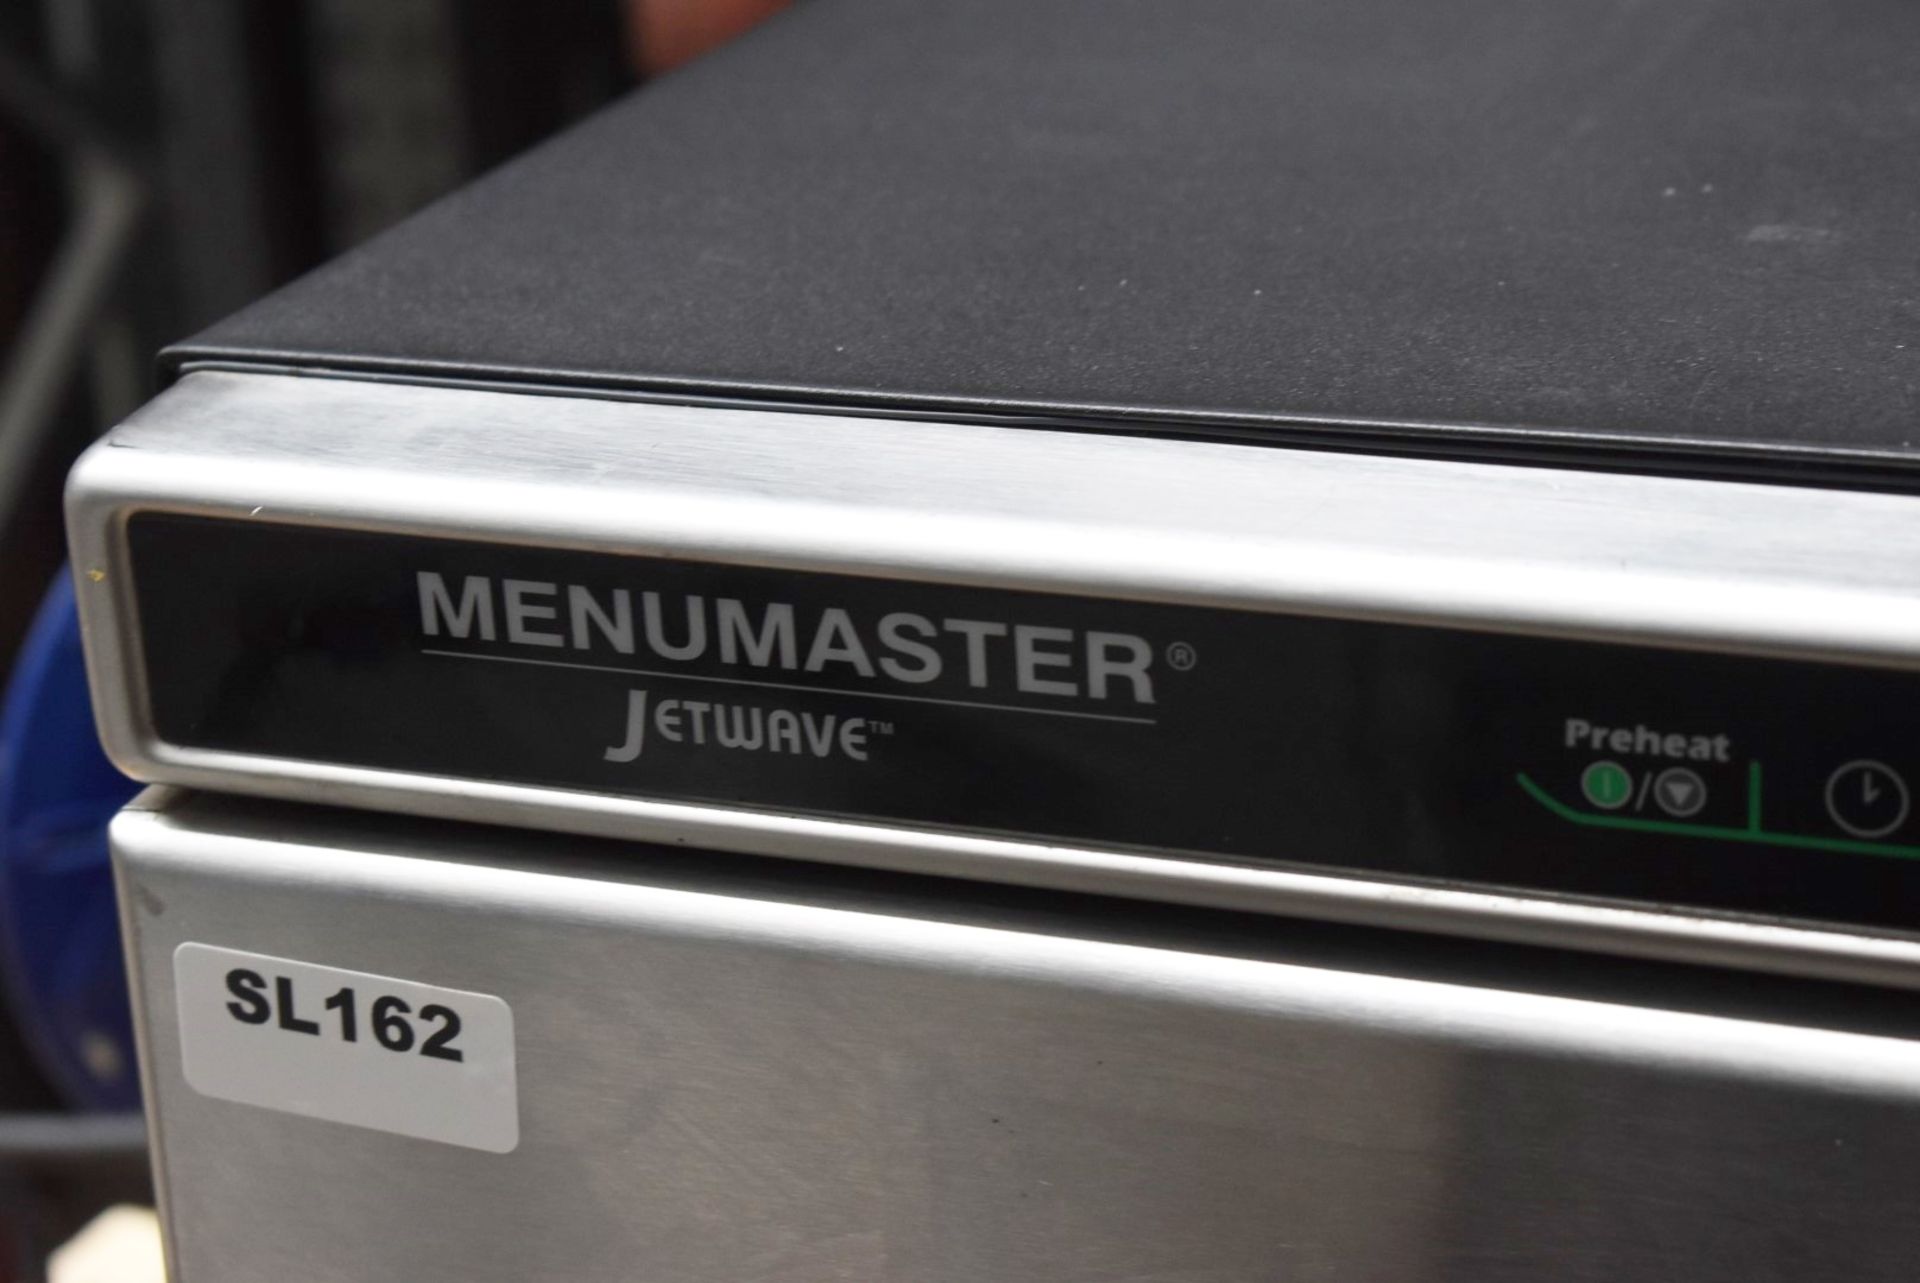 1 x Menumaster Jetwave JET514U High Speed Combination Microwave Oven - RRP £2,400 - Manufacture - Image 10 of 10